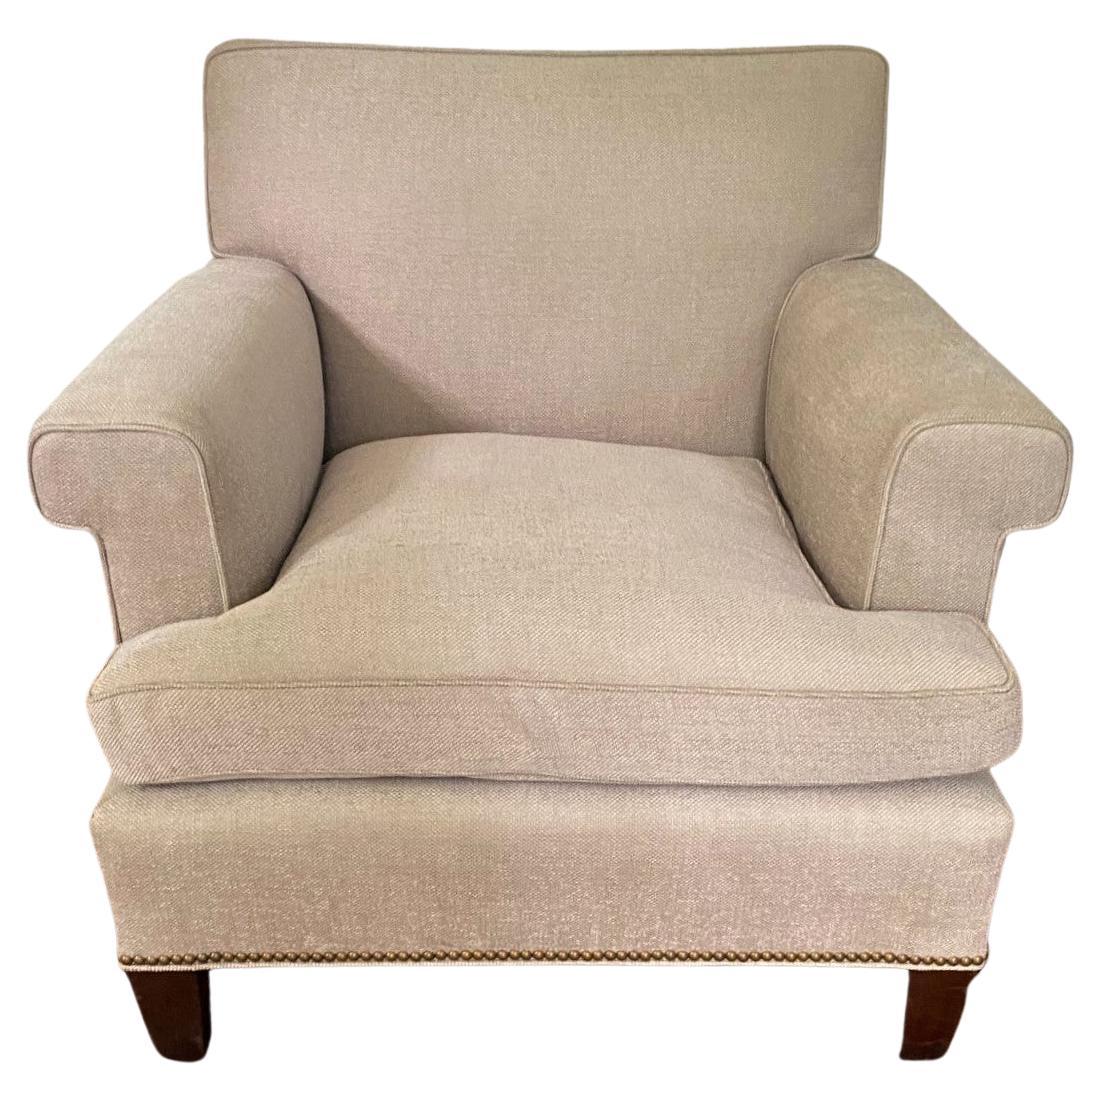 New Lawson Style Lounge Chair with Down Seat Cushion, in Stock For Sale